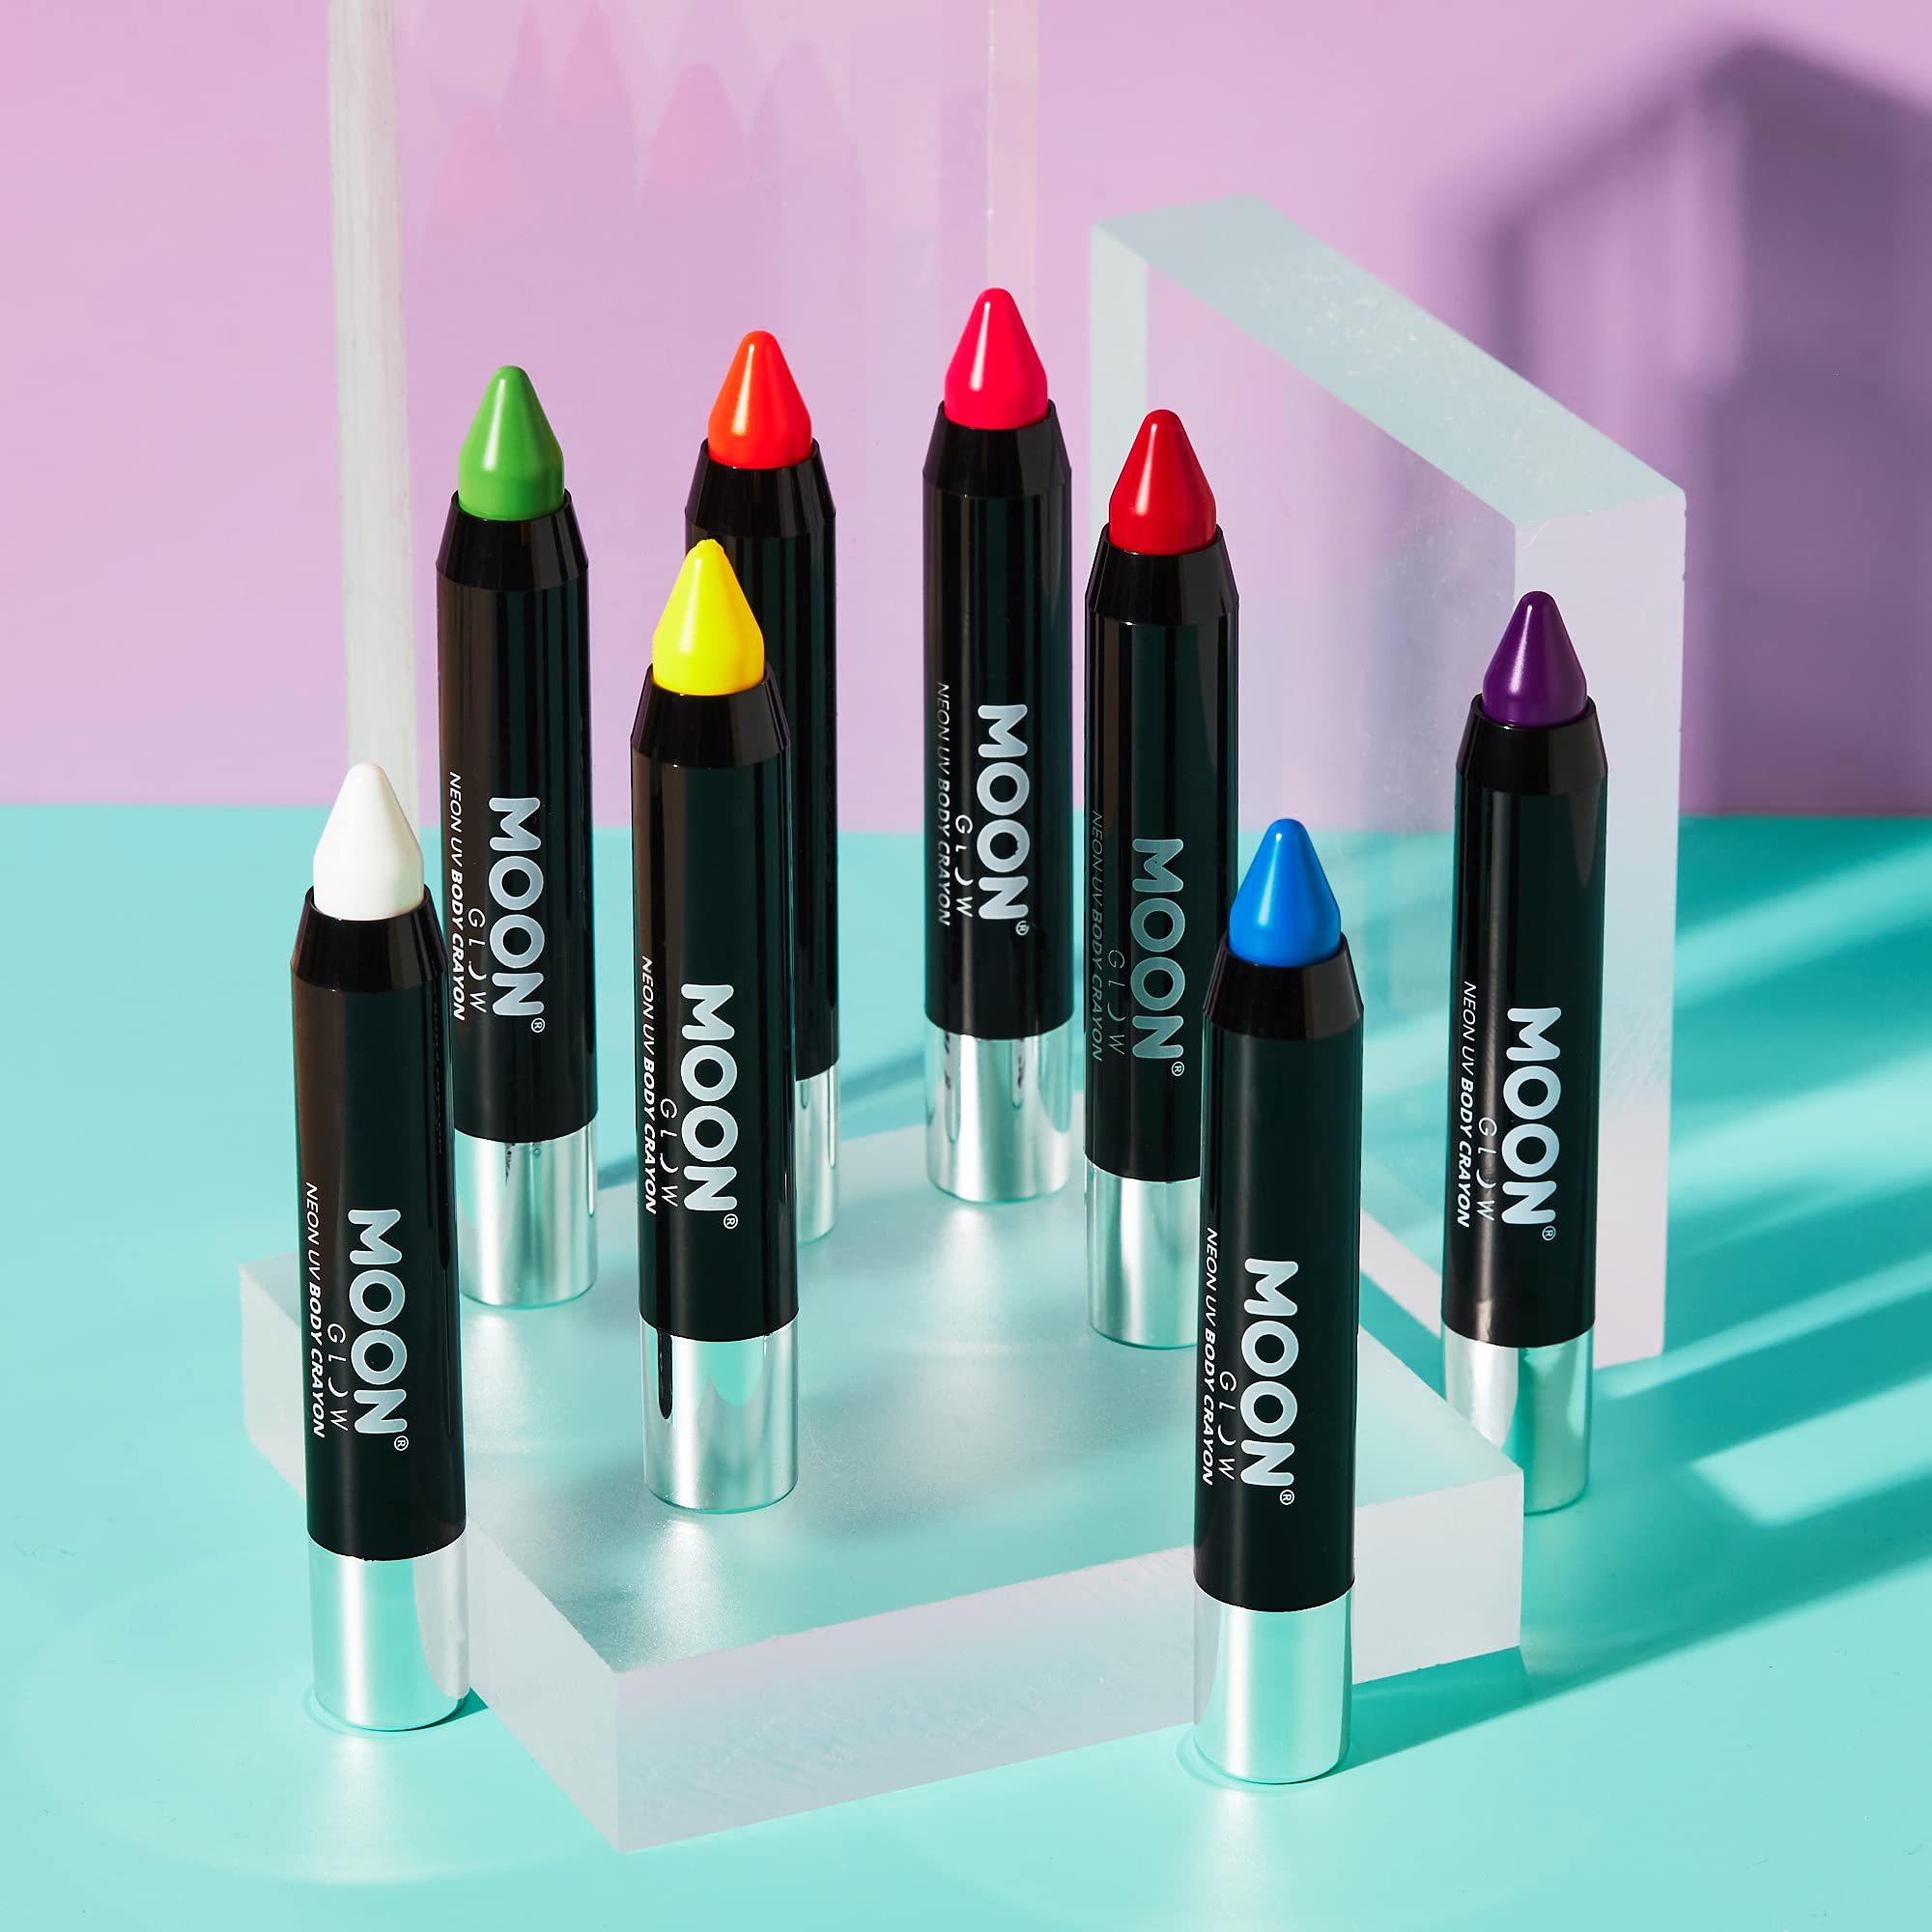 Moon Glow - Blacklight Neon Face Paint Stick/Body Crayon makeup for the Face & Body - Intense set of 8 colours - Glows brightly under blacklights